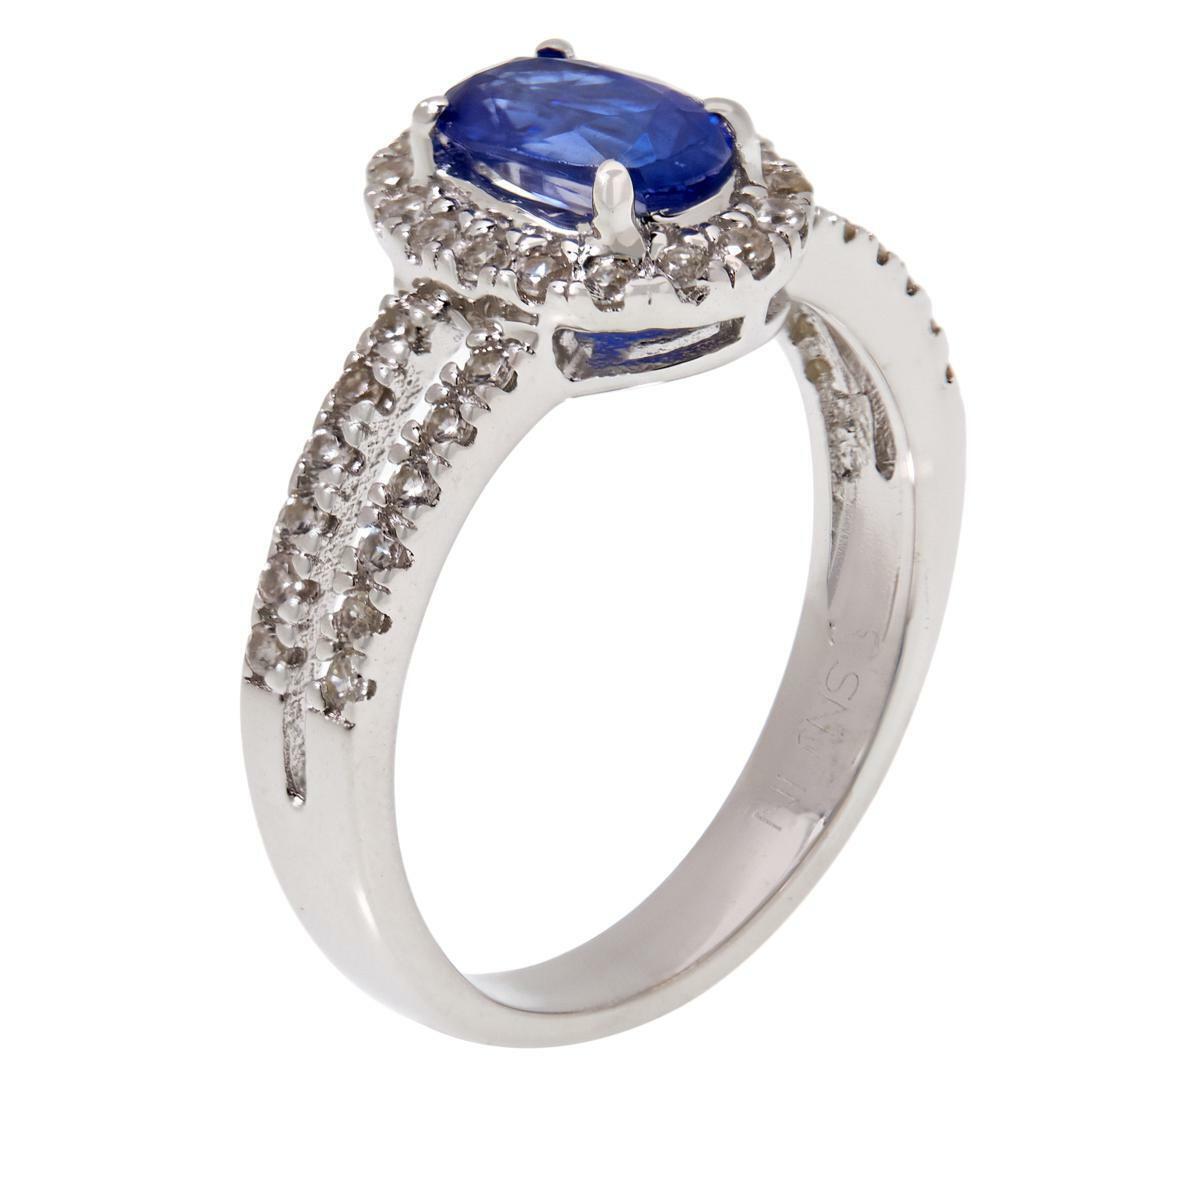 Colleen Lopez Sterling Silver Kyanite and White Zircon Halo Ring, Size 7